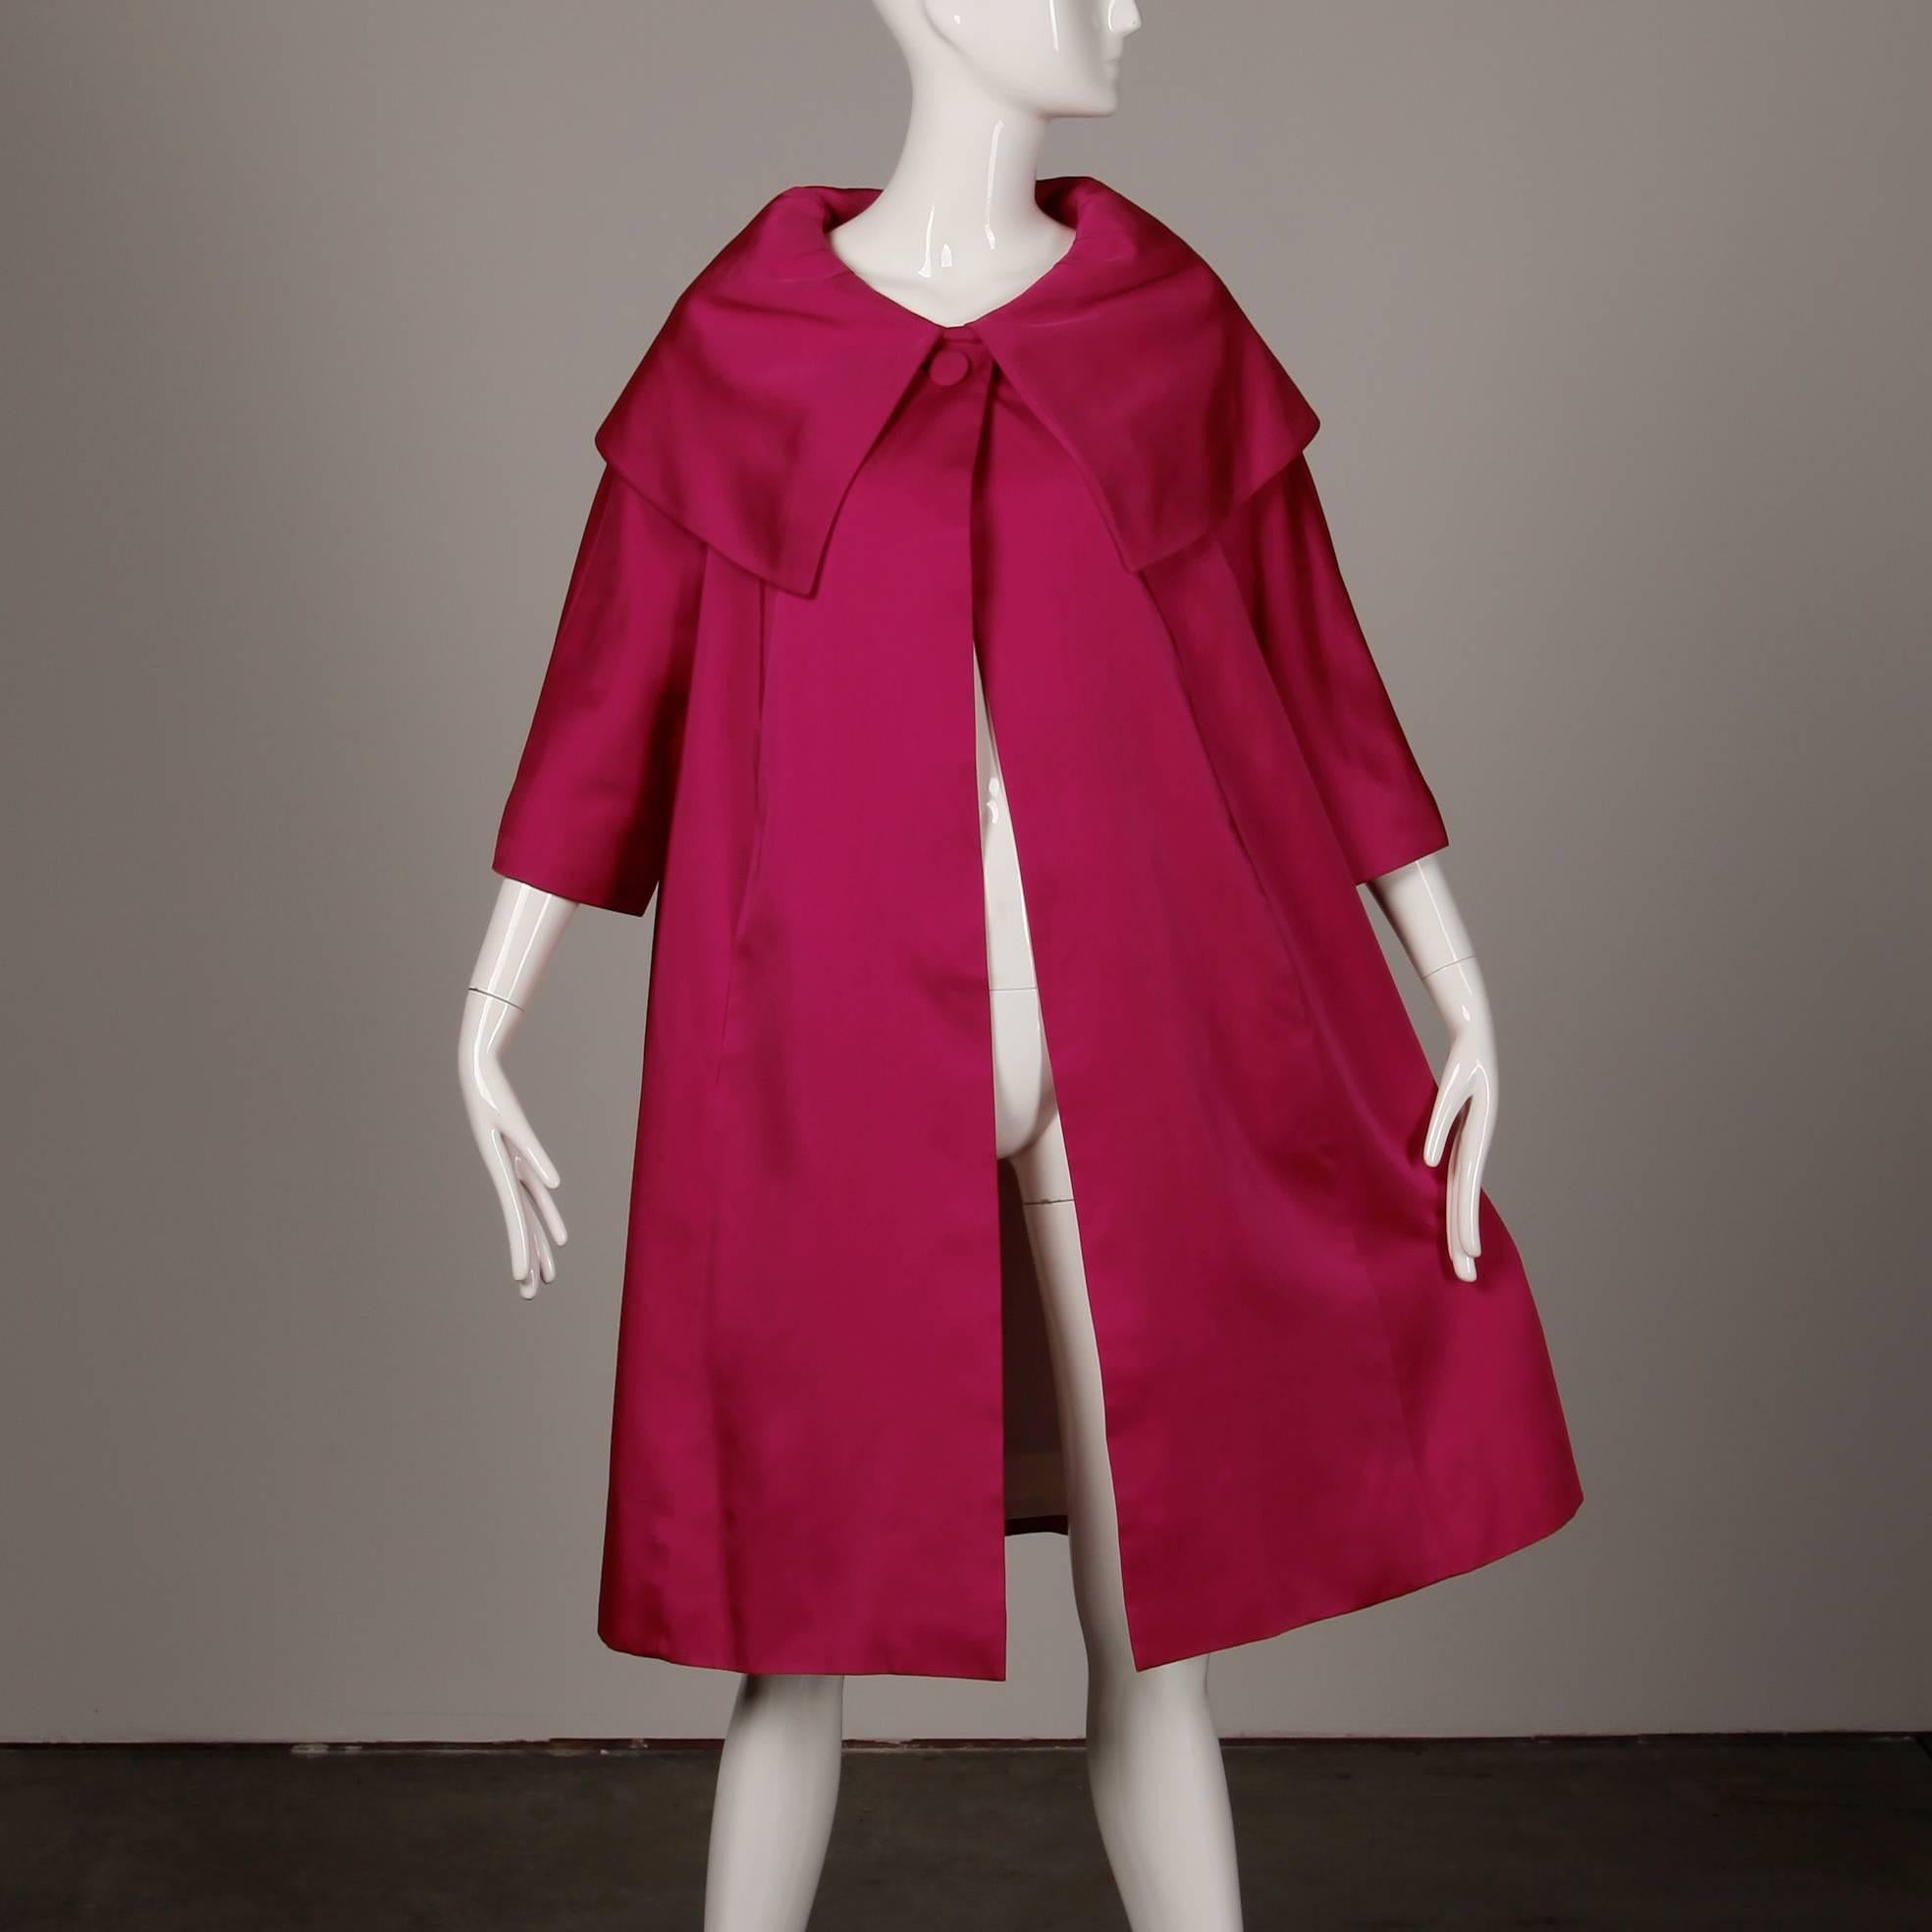 Stunning vibrant fuchsia silk satin swing coat with a giant pop up collar and full sweep by Sandra Sage. Fully lined with front button and snap closure. Hidden side pockets. Fits most sizes XS-XL due to the free shape. The bust measures 46